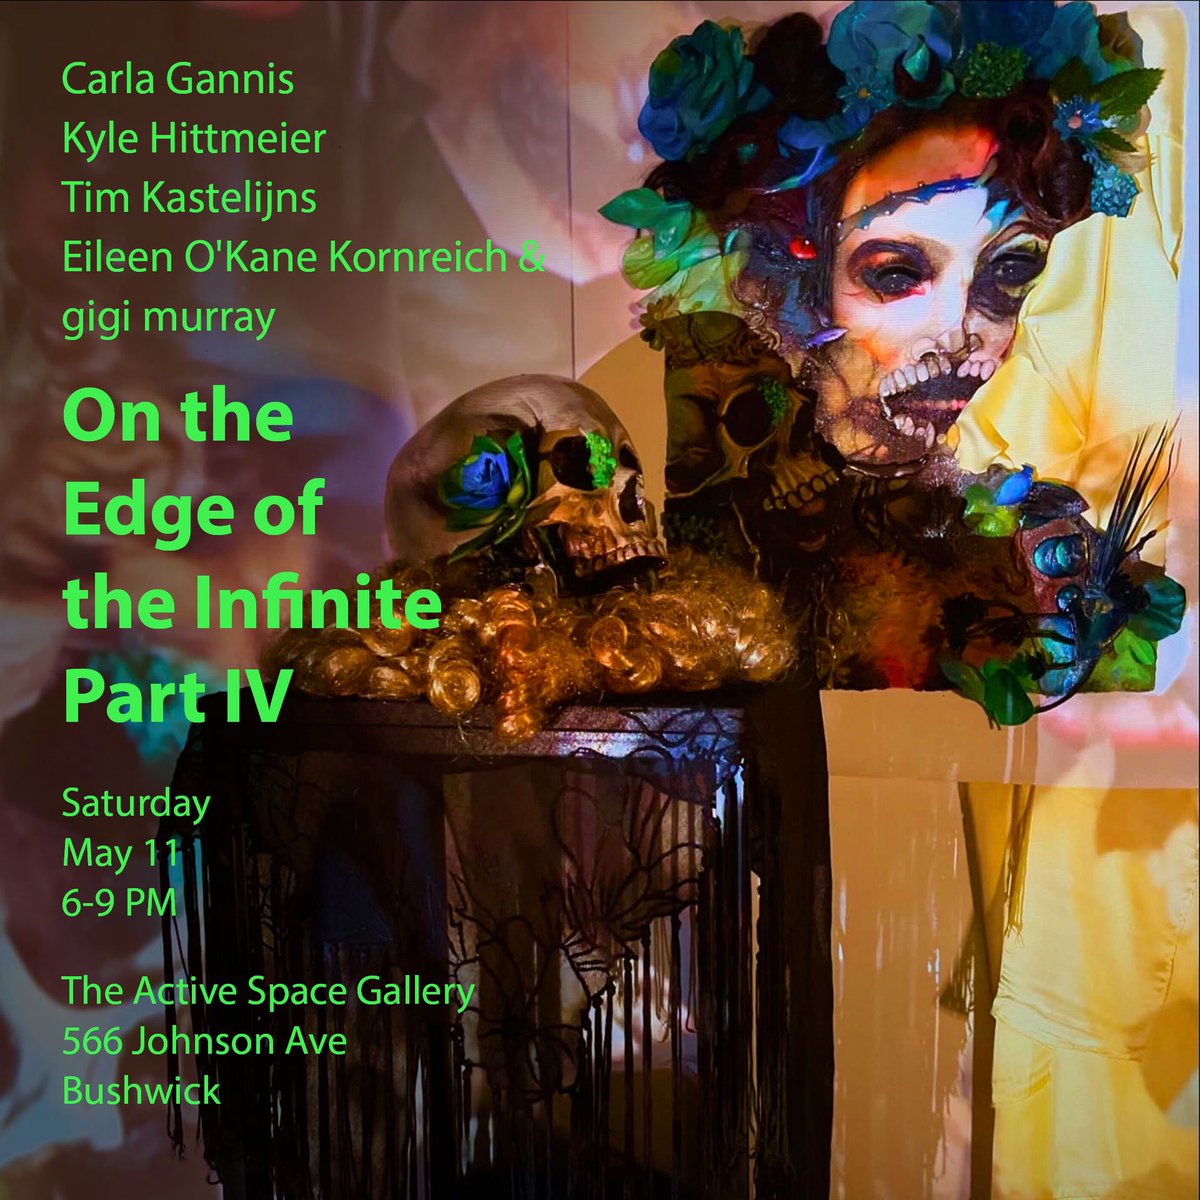 THIS SAT for 1 NIGHT ONLY 🎆 ON THE EDGE OF THE INFINITE PART IV 🎆 Sat, May 11 from 6-9pm at Active Space Gallery, Bushwick Including Artists: Carla Gannis, Kyle Hittmeier, Tim Kastelijns, Eileen O’Kane Kornreich and gigi murray partiful.com/e/bpIlgdAGcfkr… (RSVP not required)